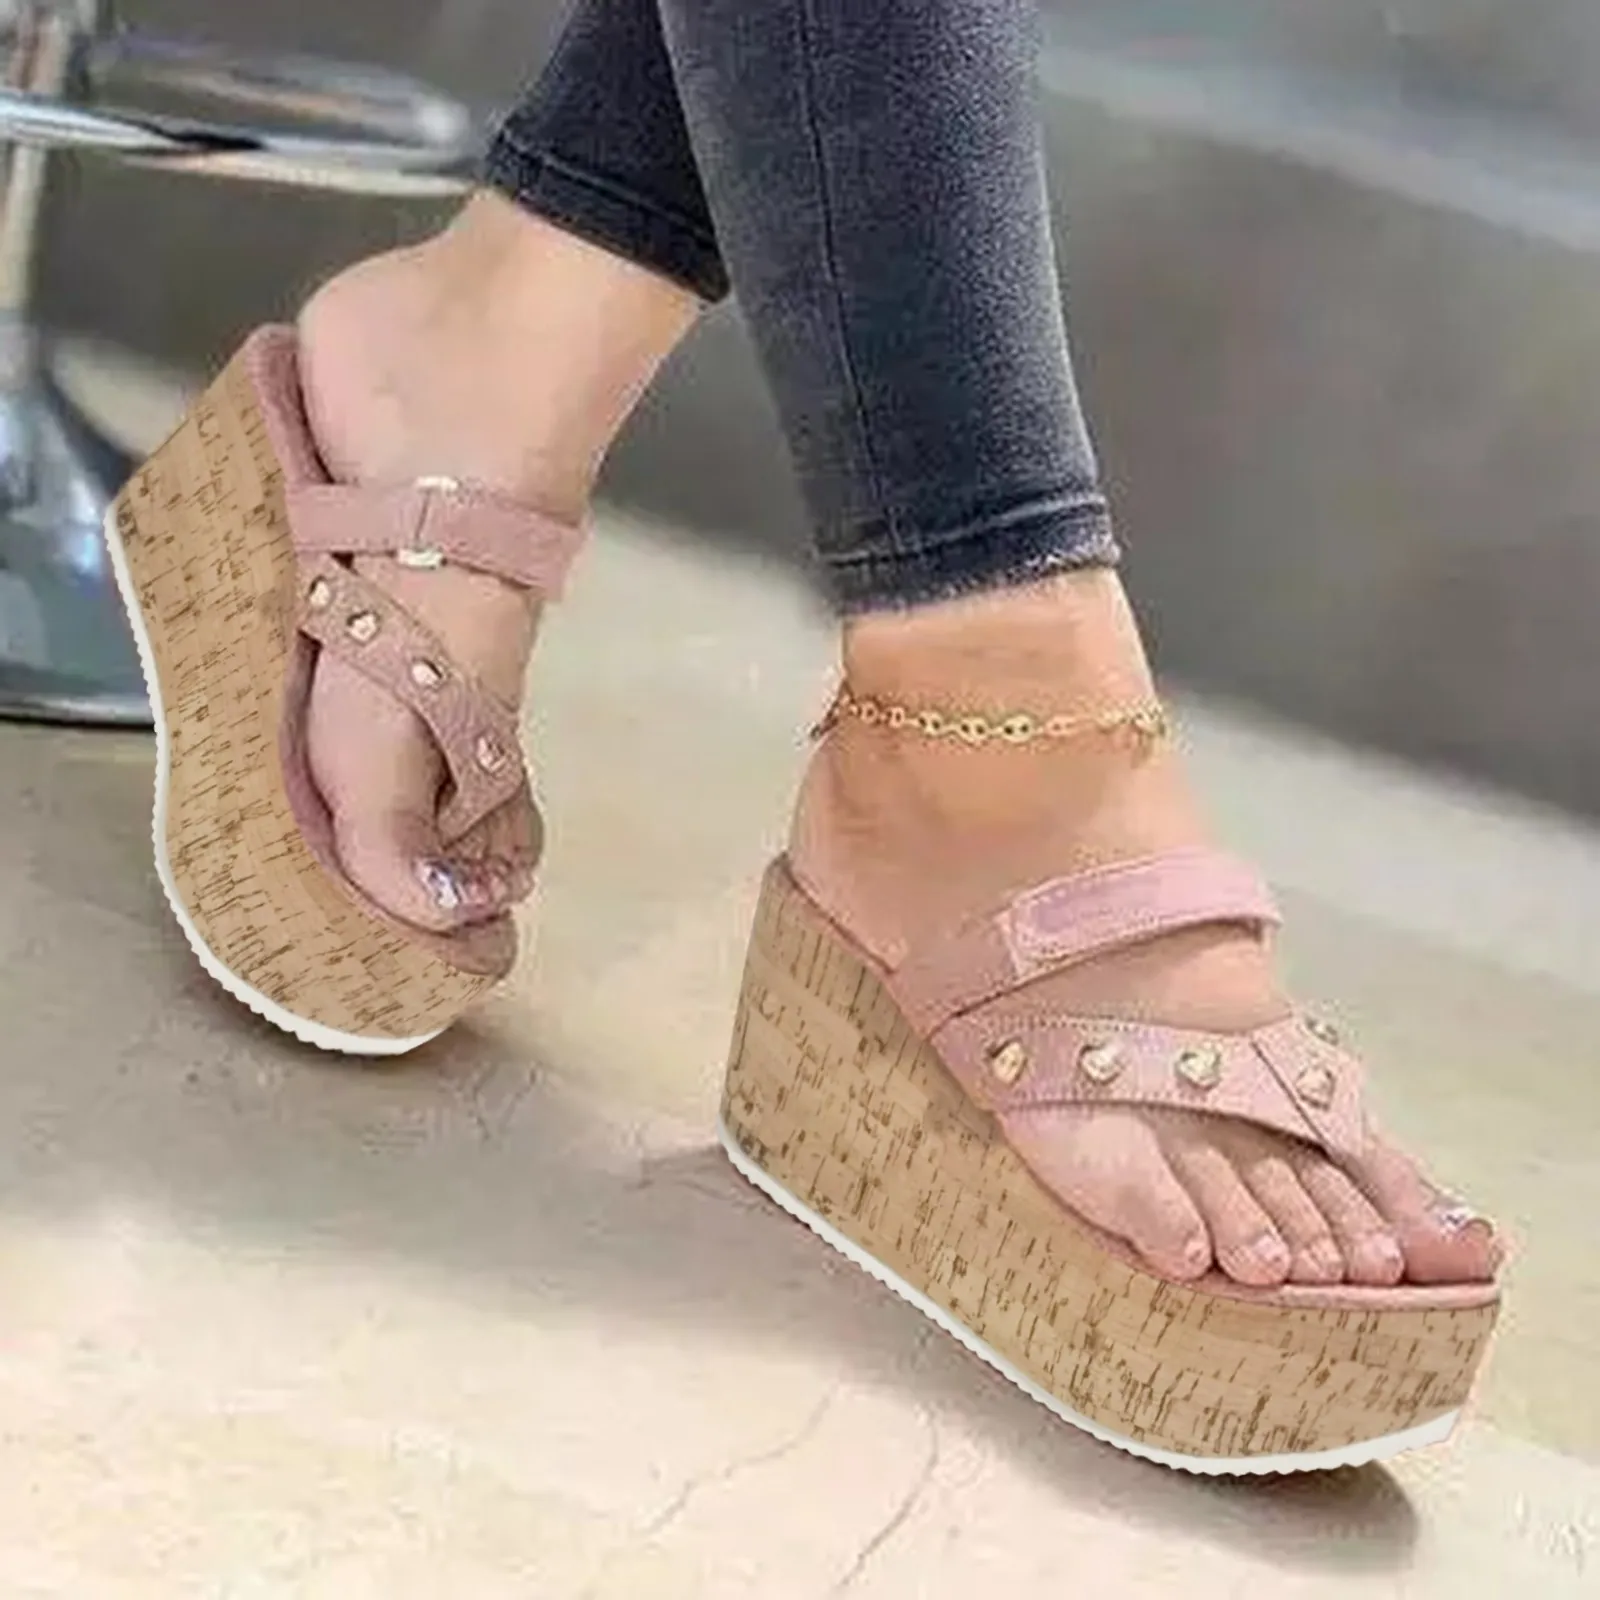 Womens Fashion Wedge Sandals Slippers Casual Sandals Shoes Round Toe Wedges Heels Dress Beach Party